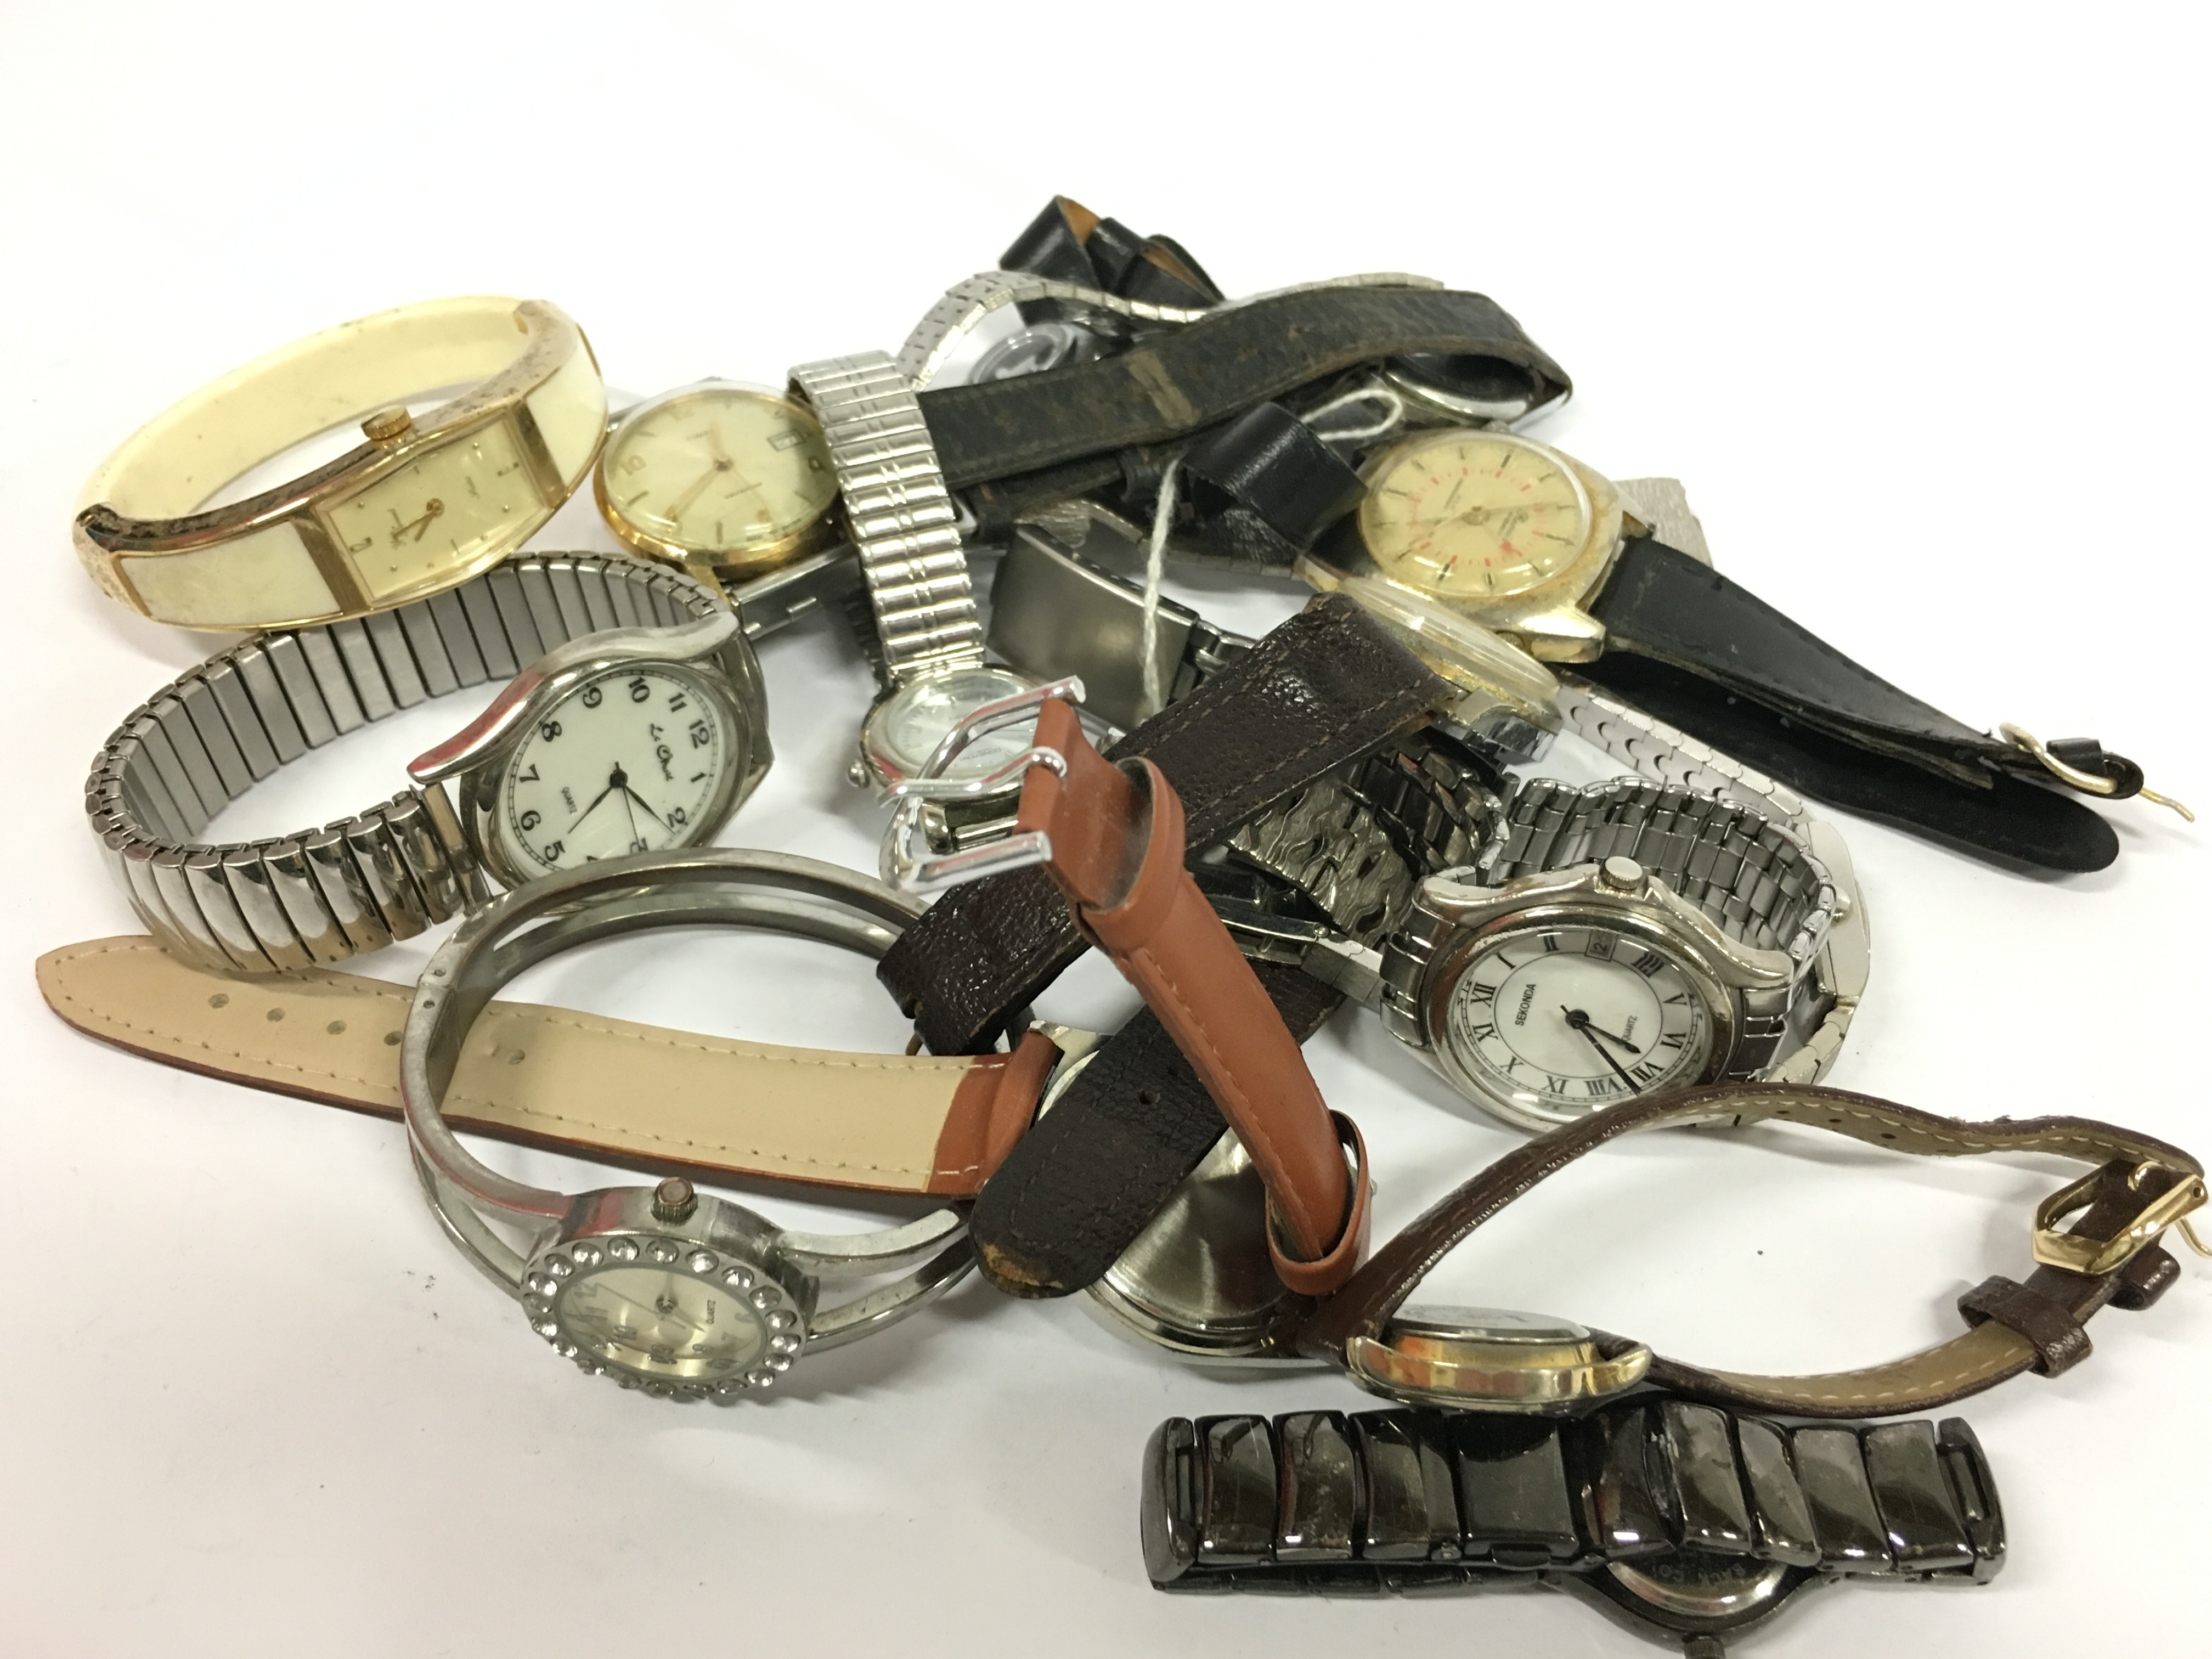 A collection of various wrist watches.